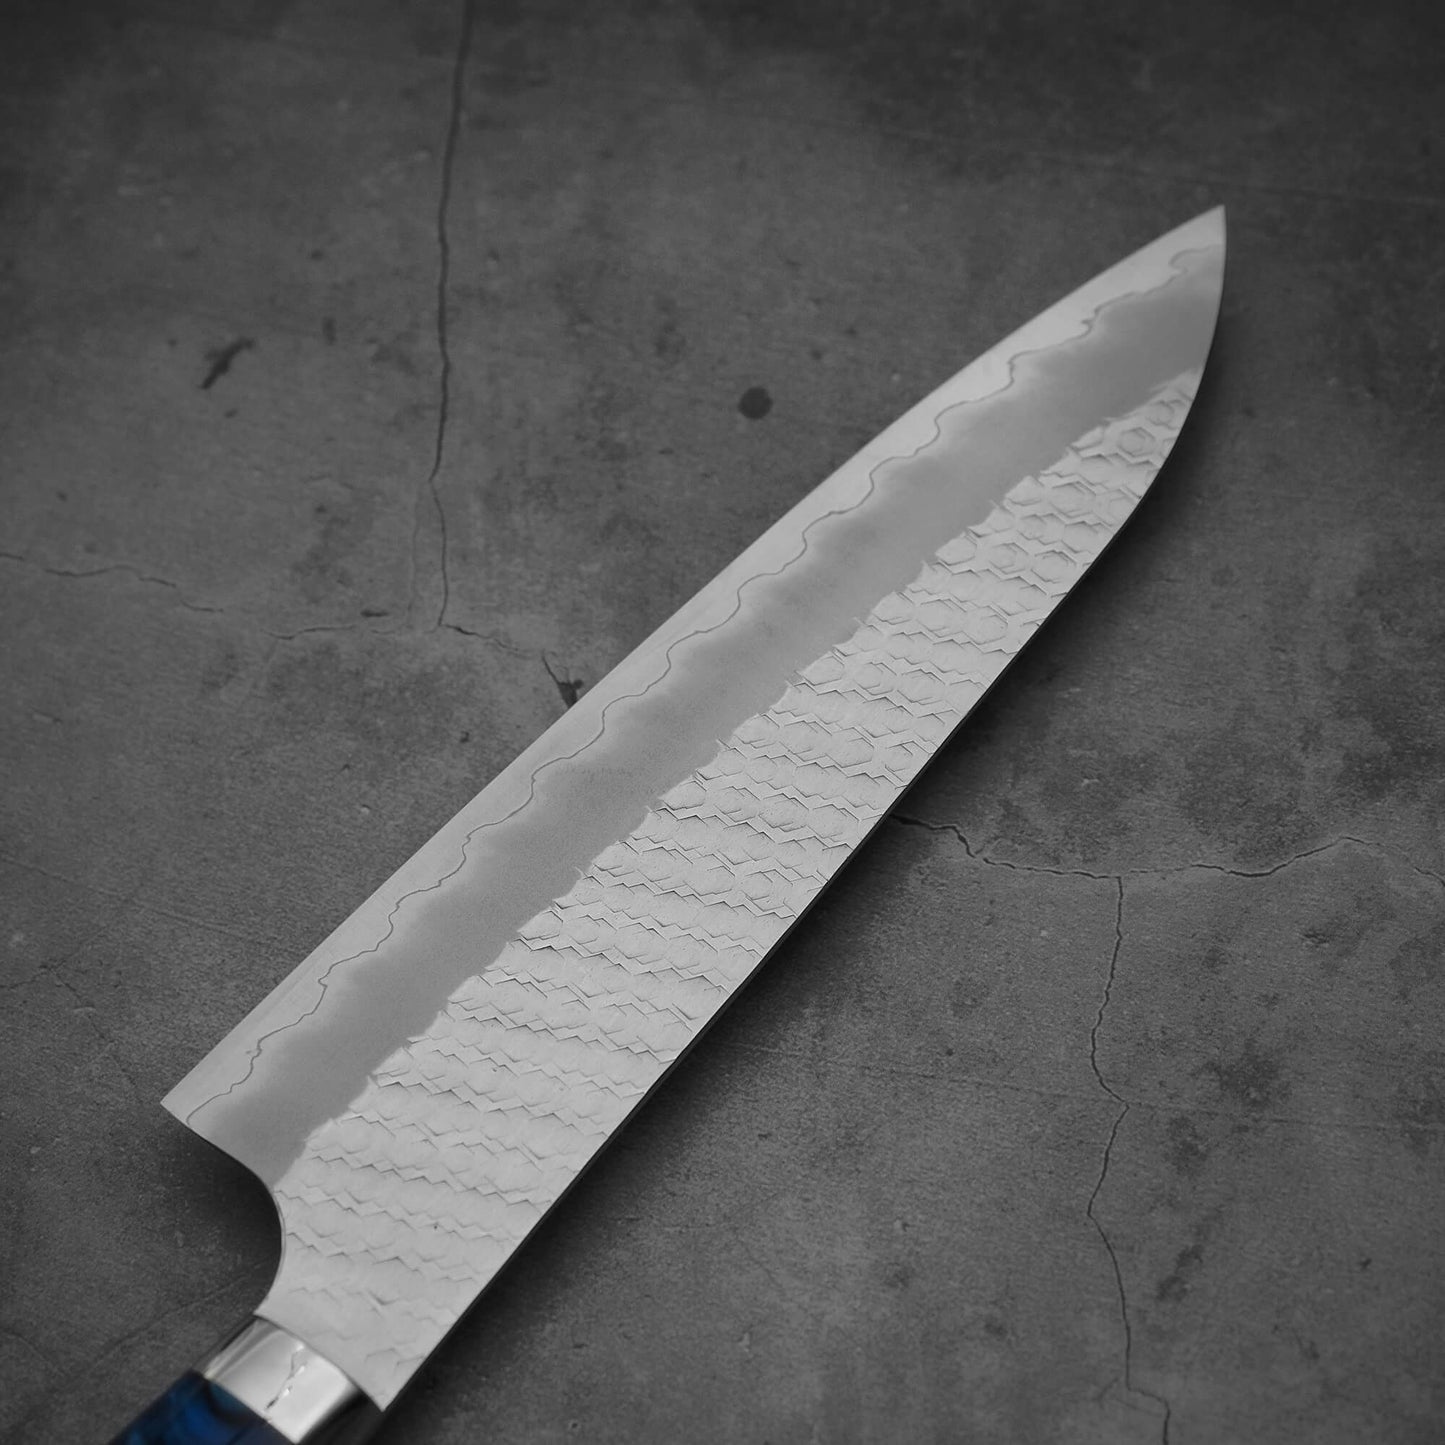 Top view of the blade of 210mm Nigara tsuchime SG2 gyuto knife with blue handle